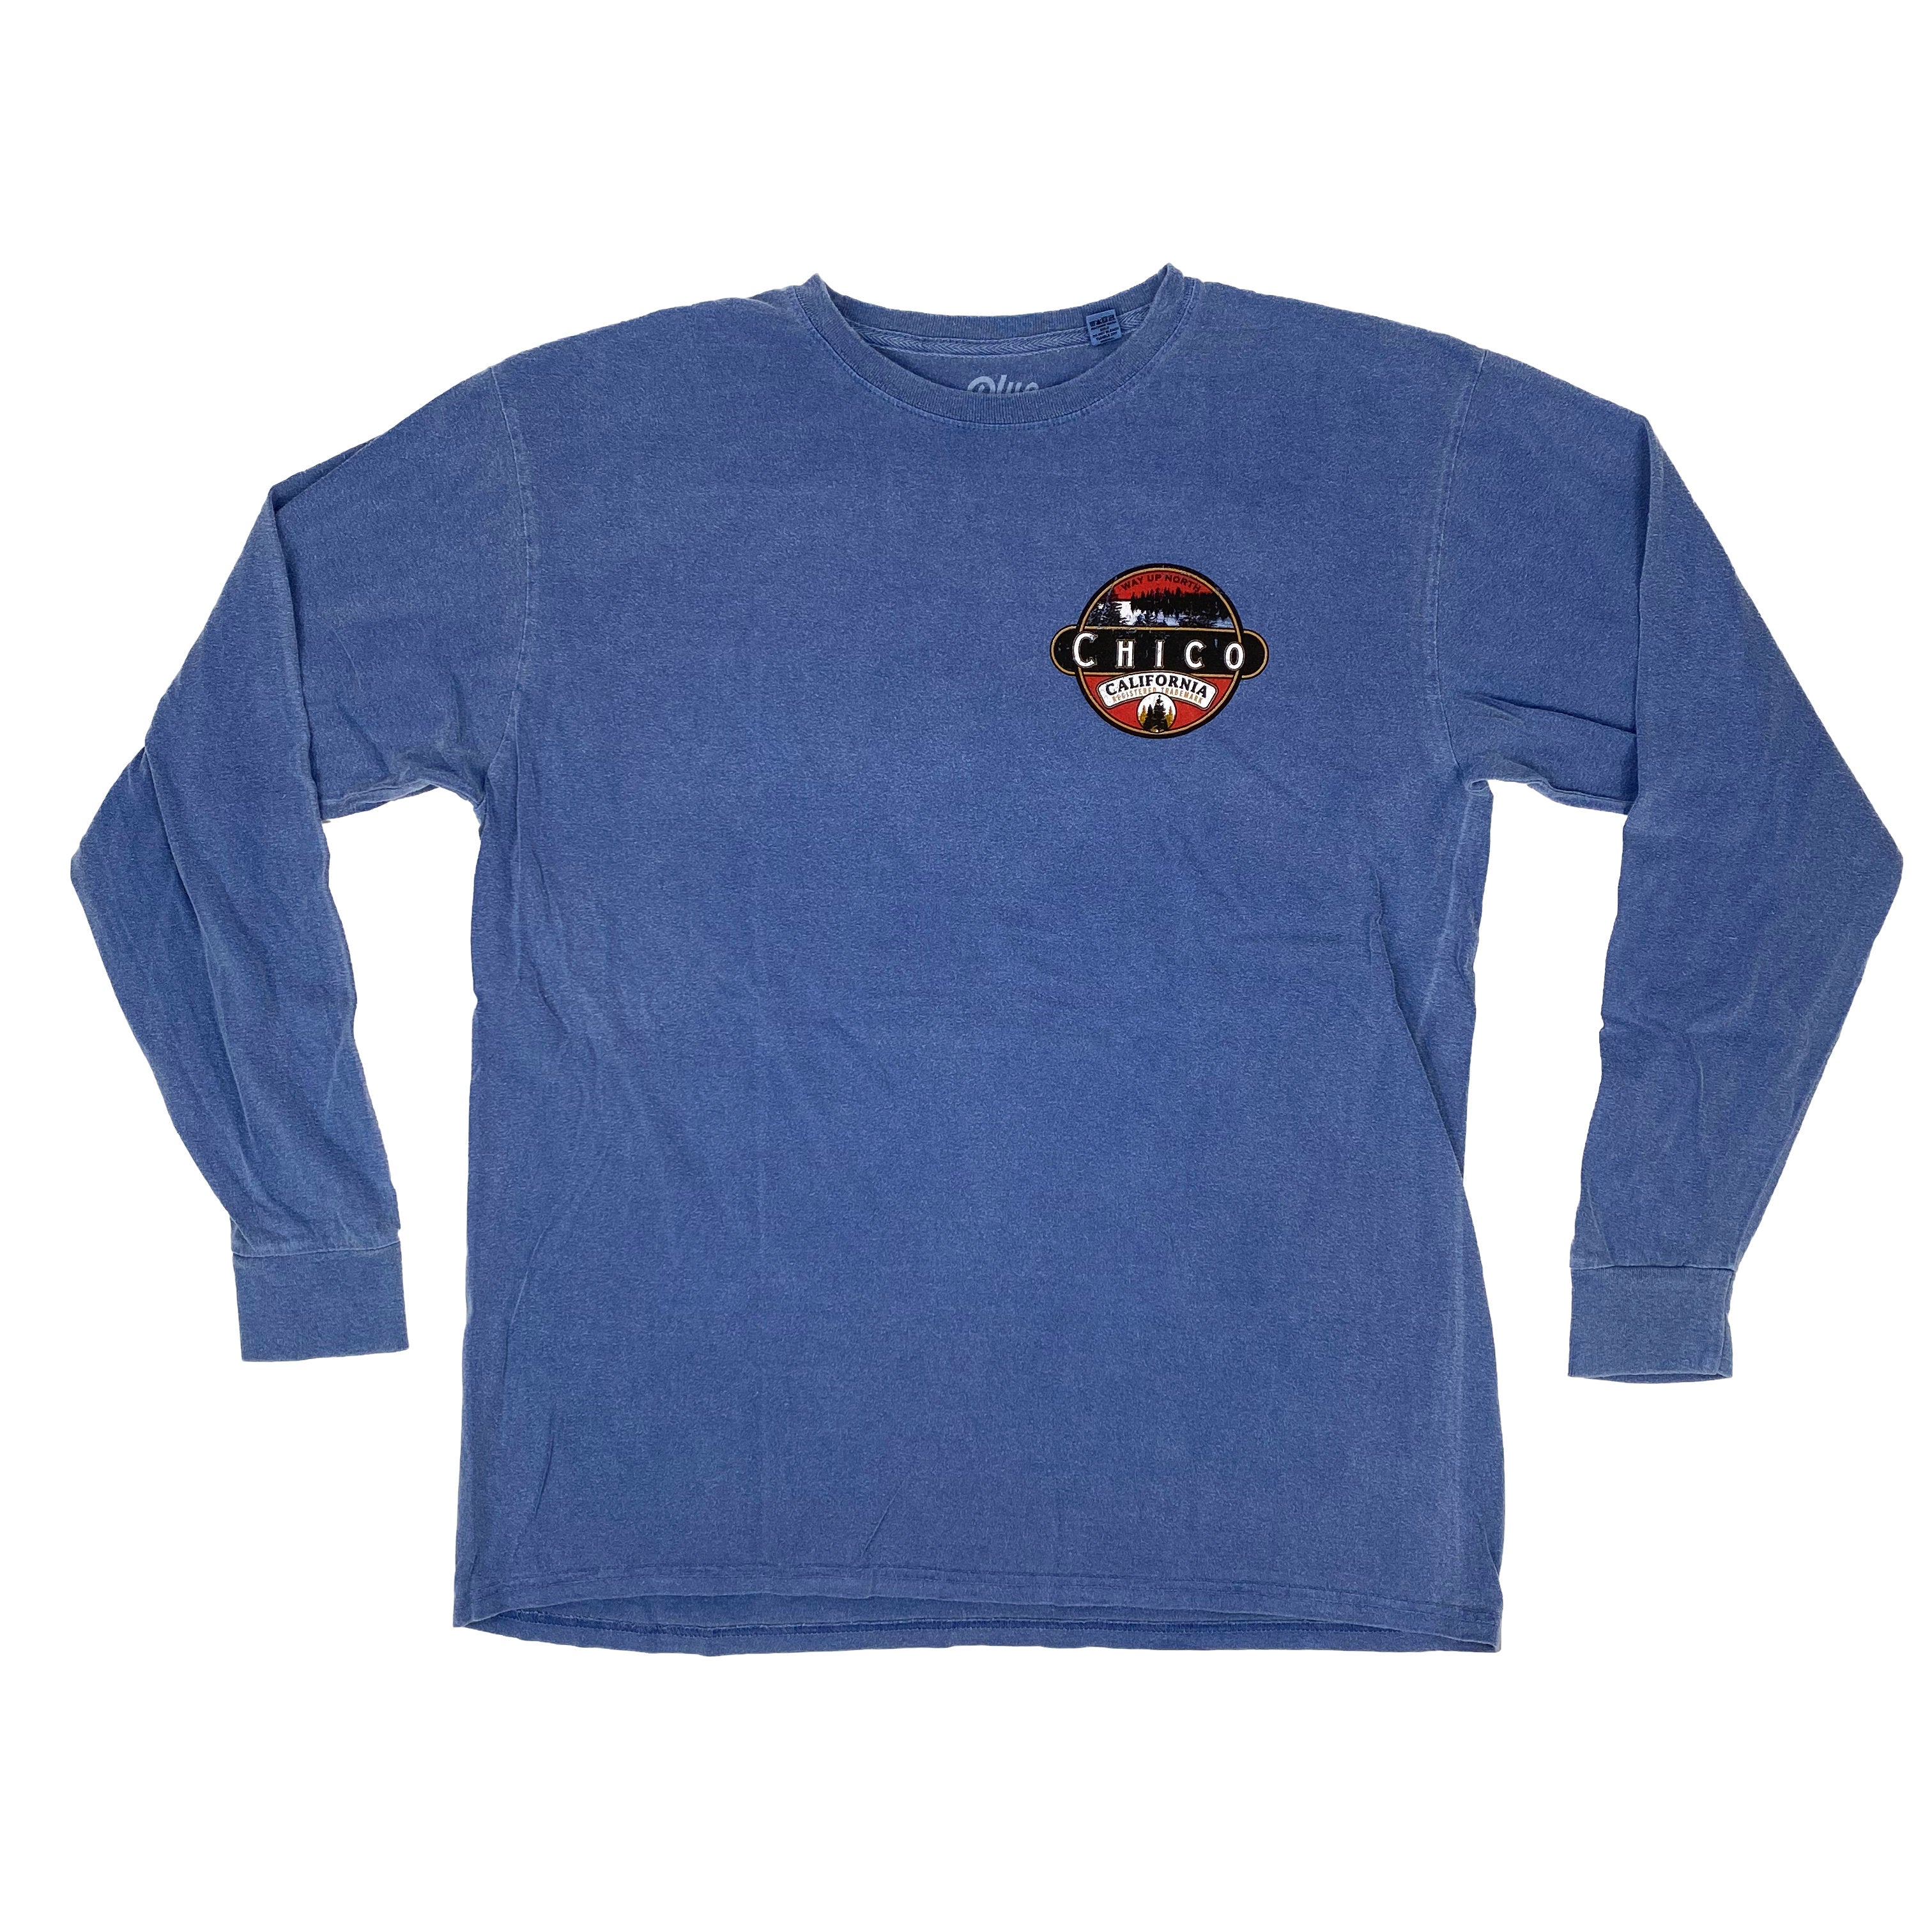 Carson Way Up North Chico - Long Sleeve T-Shirt PACIFIC BLUE S  3269258.1